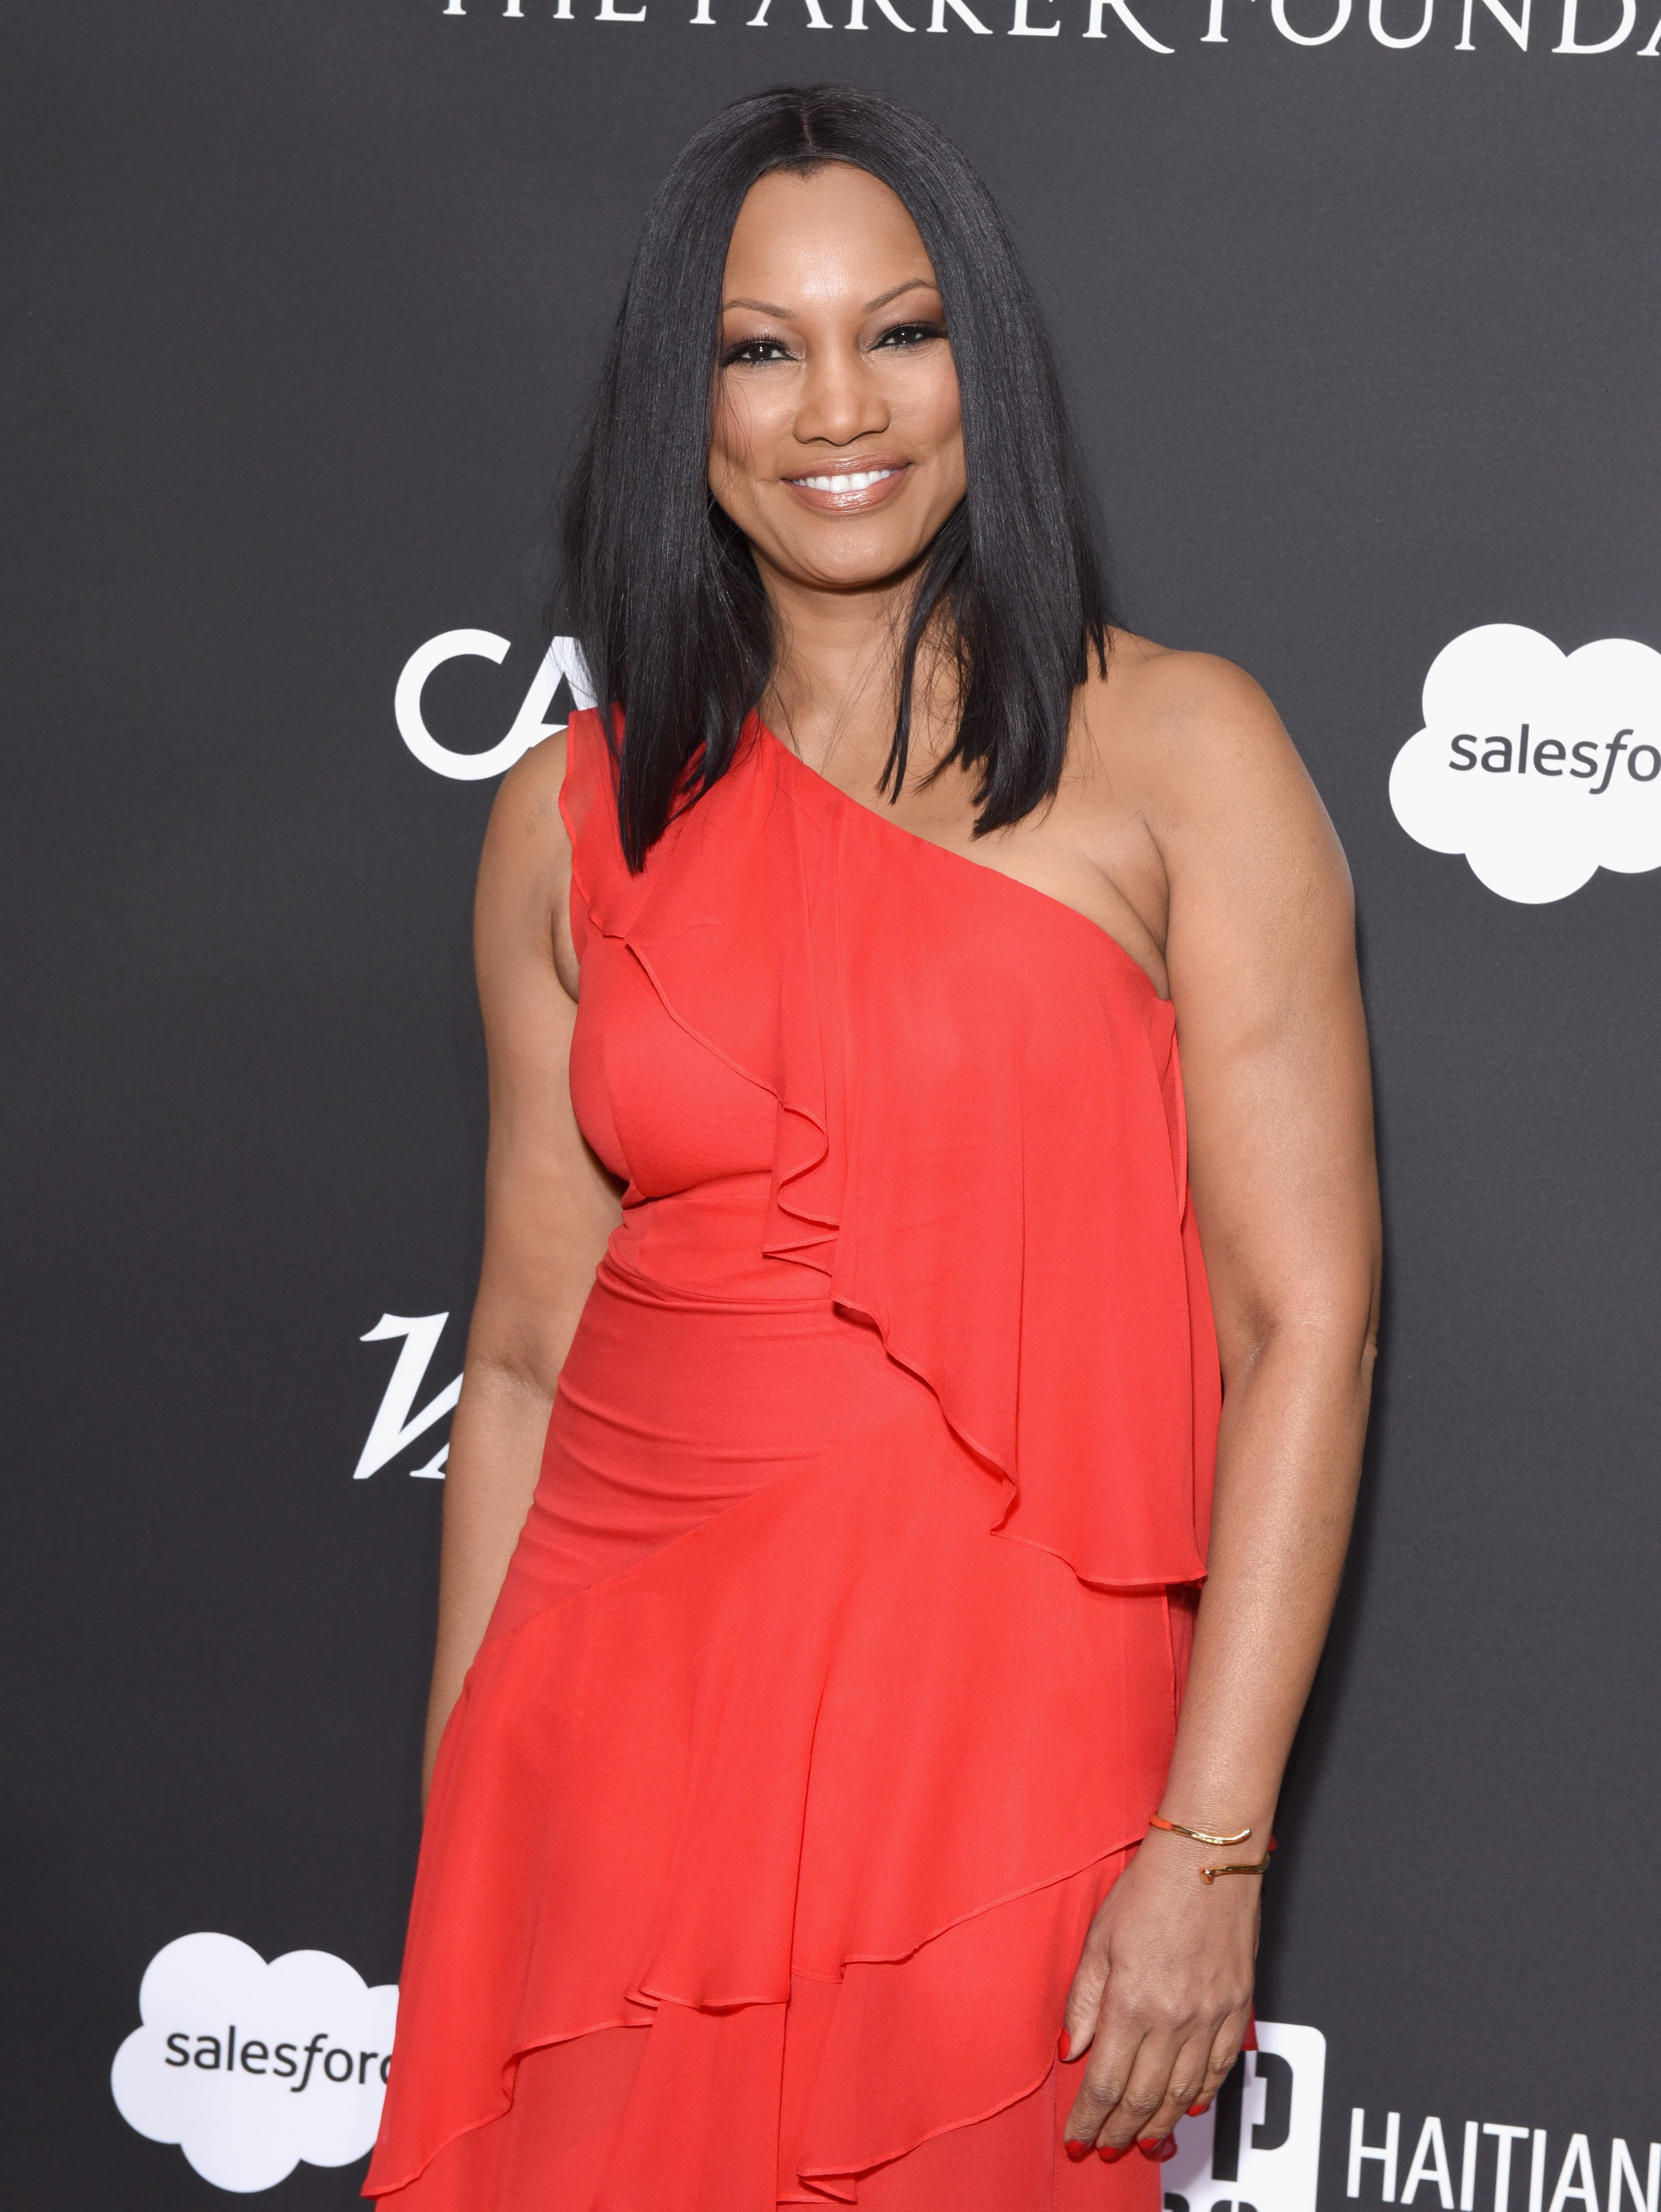 Garcelle Beauvais at the 7th Annual Sean Penn & Friends HAITI RISING Gala on January 6, 2018 in Hollywood, California. | Source: Getty Images